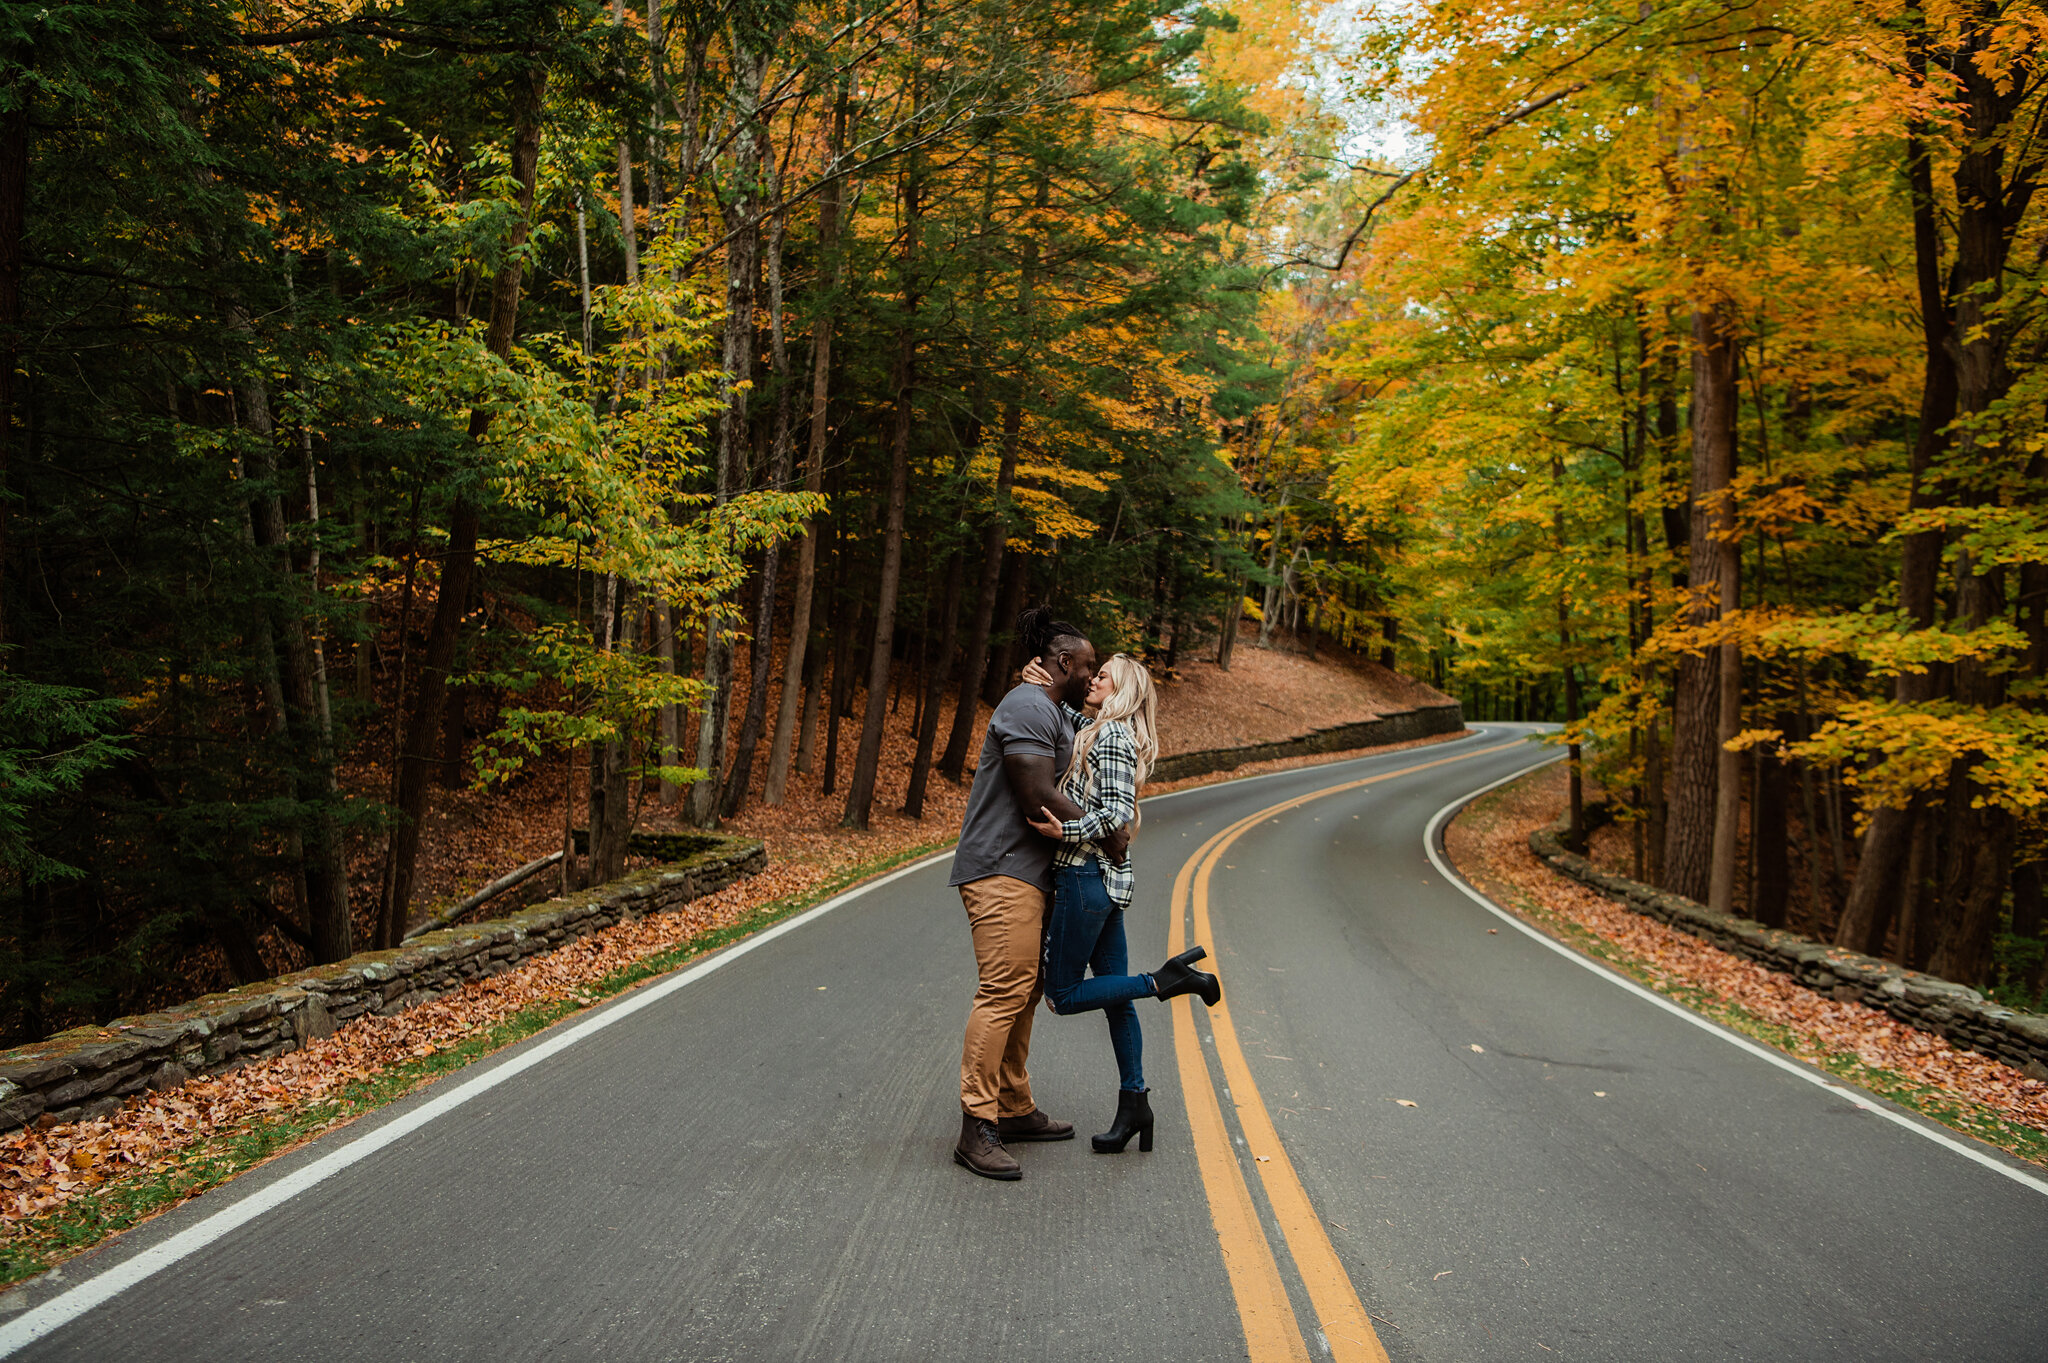 Letchworth_State_Park_Rochester_Couples_Session_JILL_STUDIO_Rochester_NY_Photographer_9490.jpg